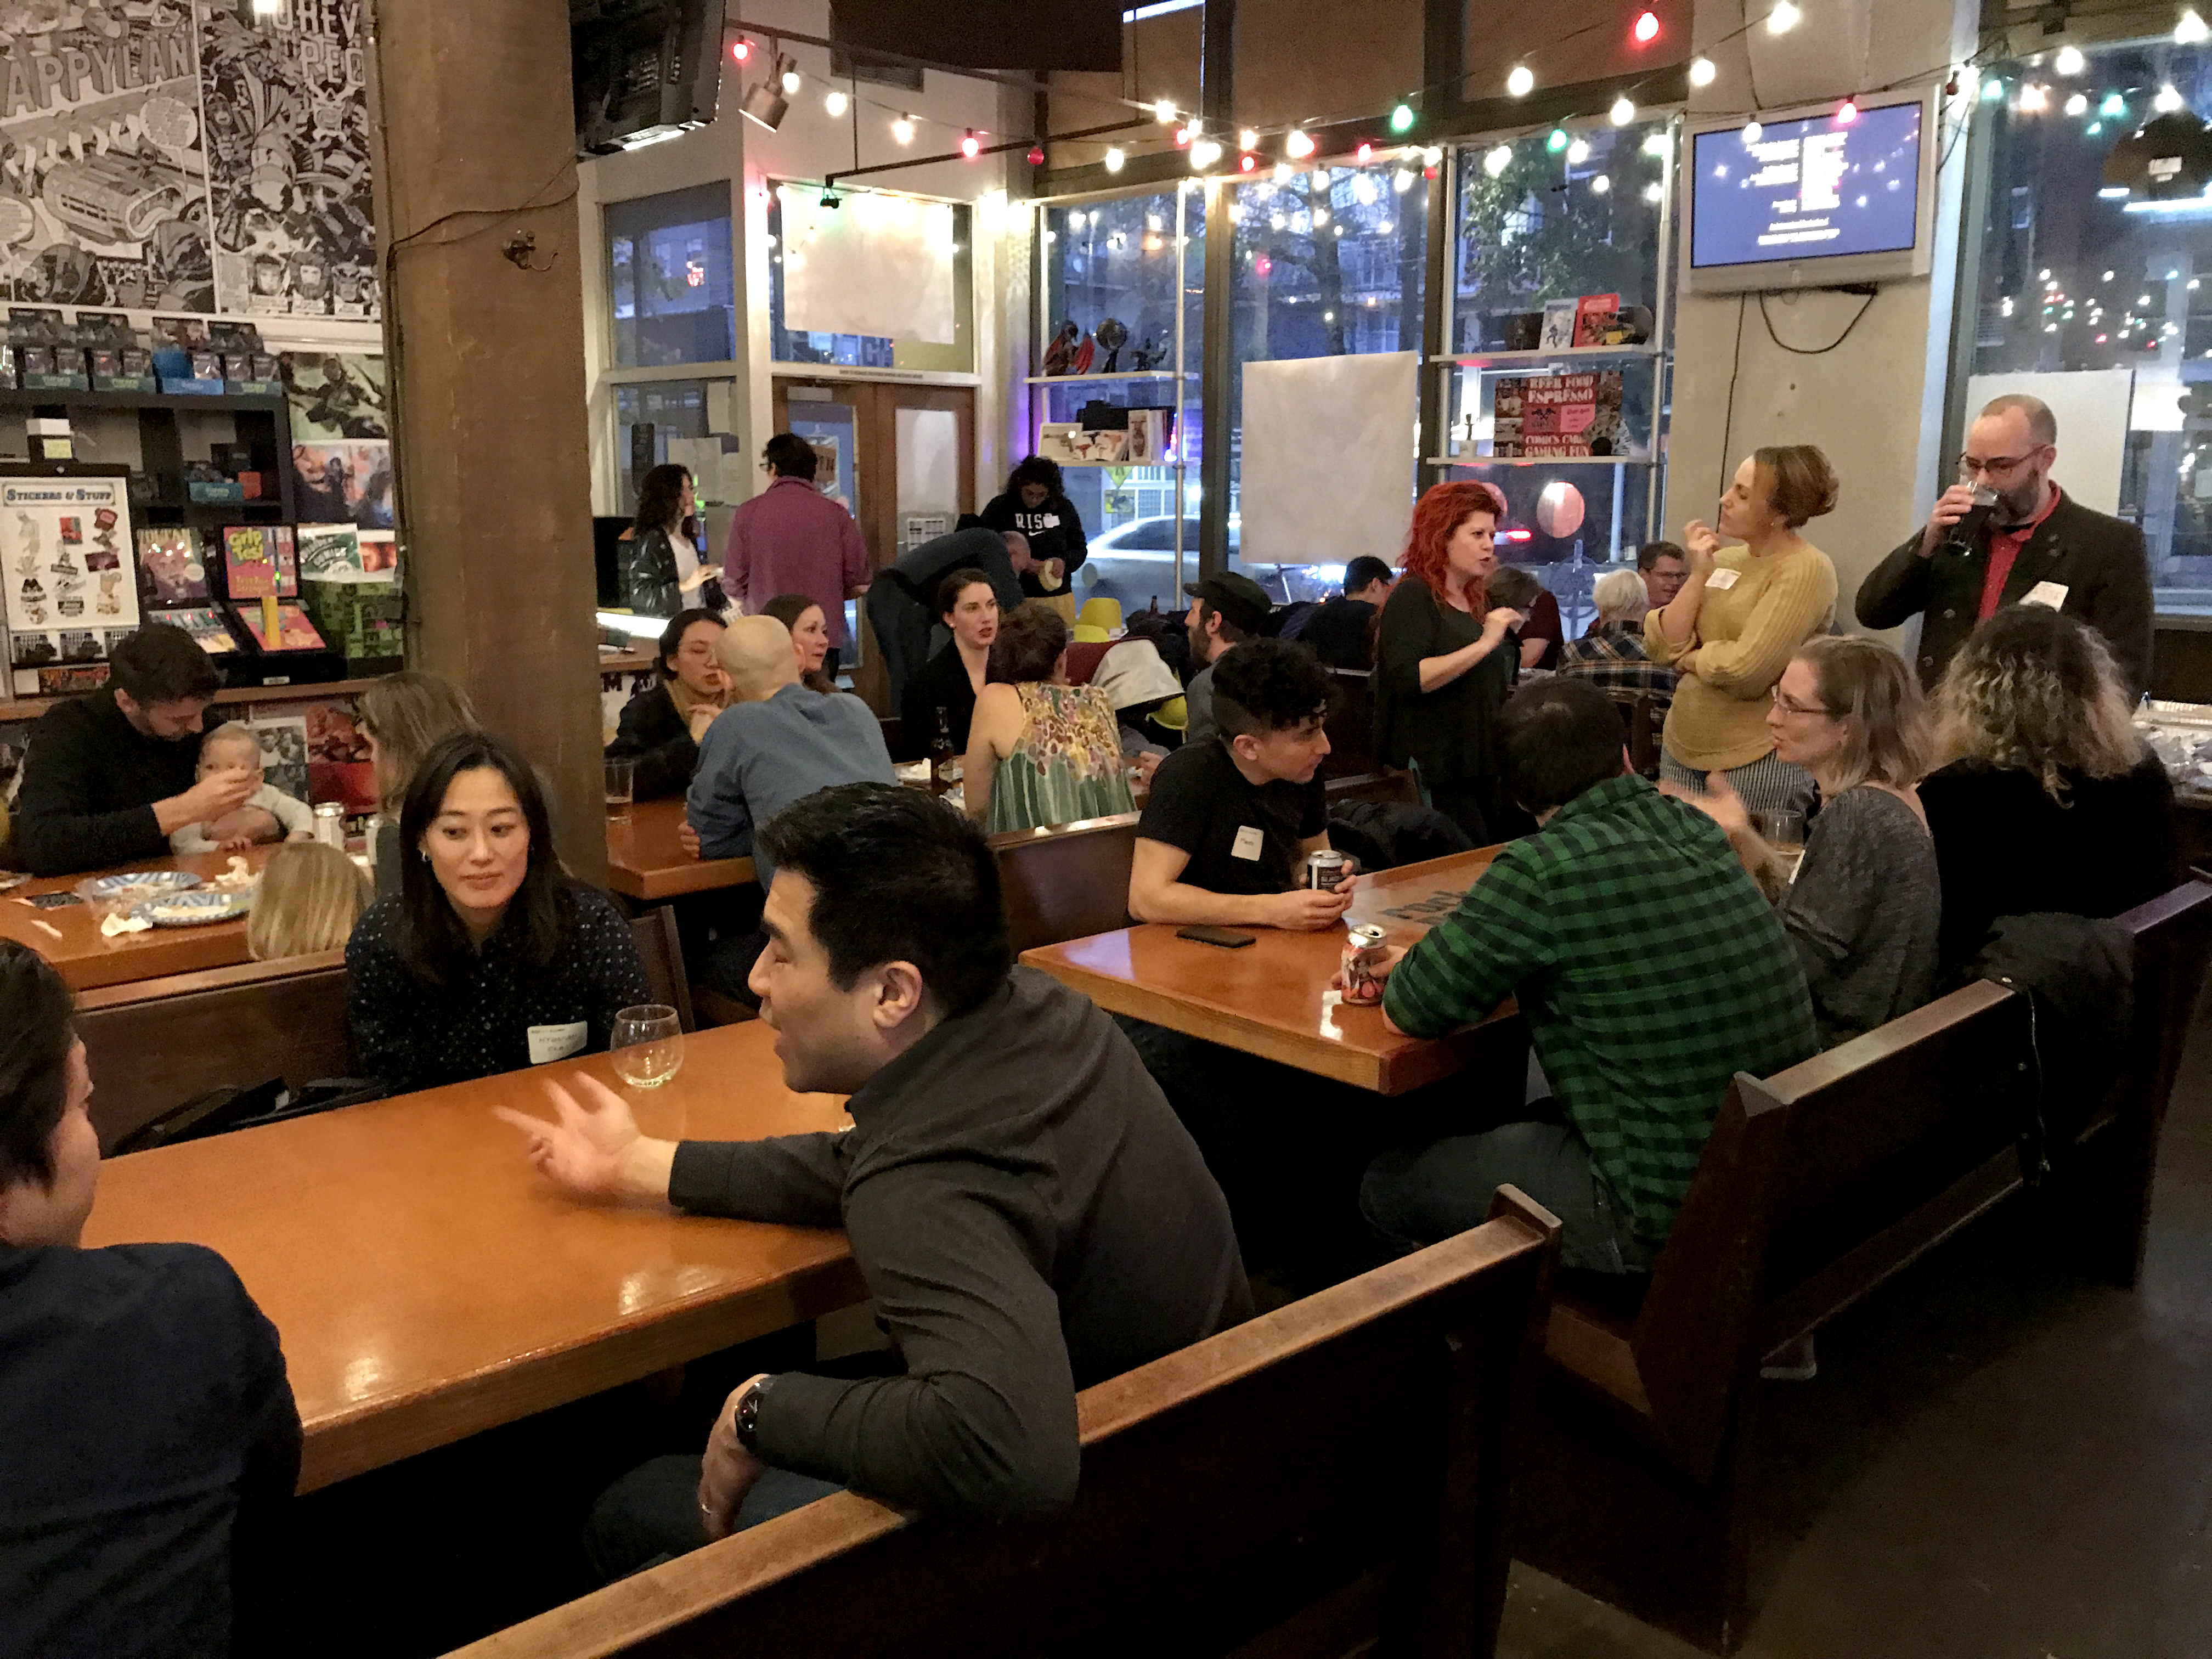 Groups of people conversing at restaurant tables